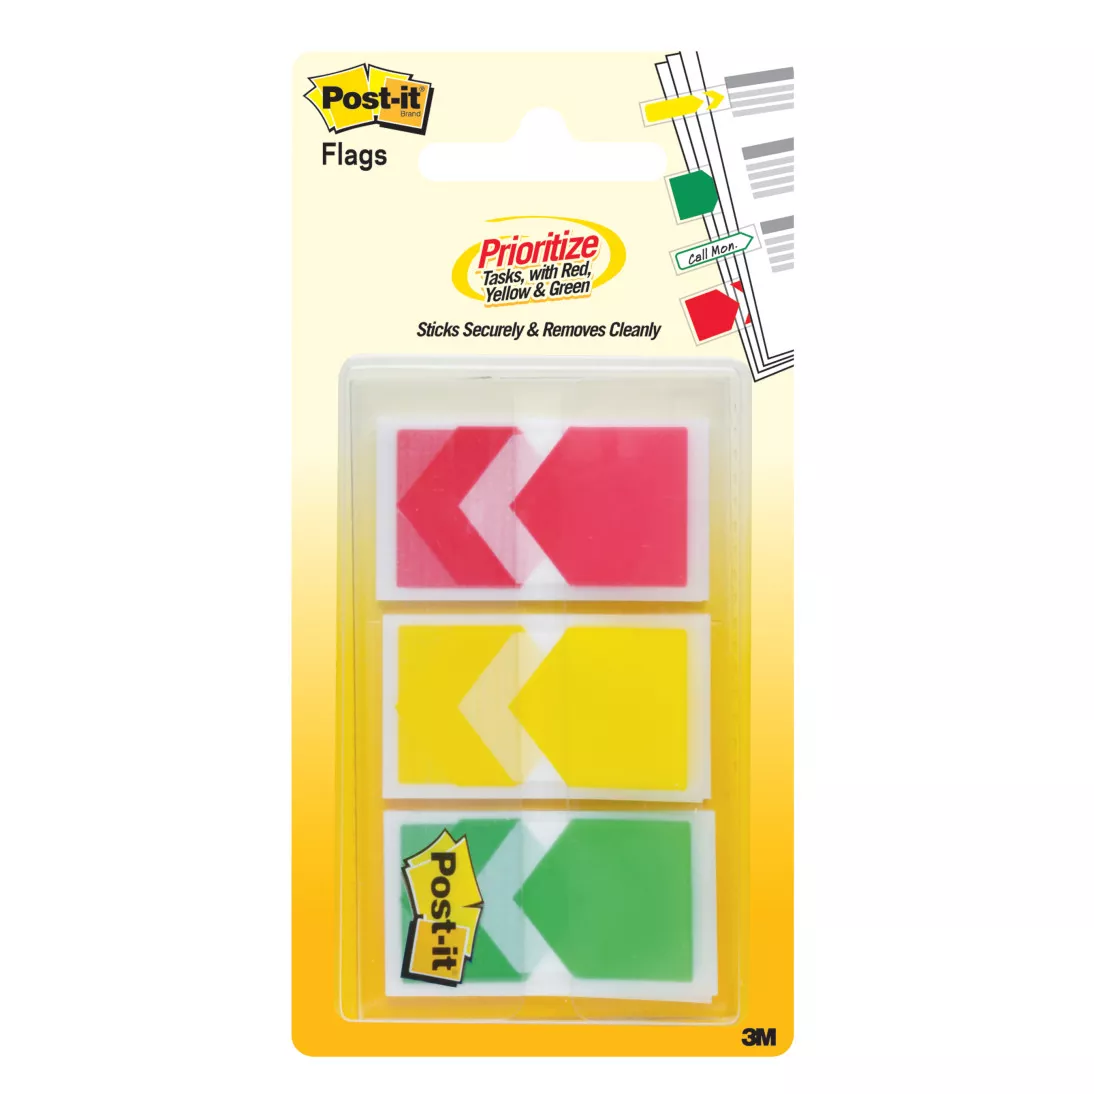 Post-it® Prioritization Flags 682-ARR-RYG, .94 in. x 1.7 in. (24 mm x
43.2 mm)